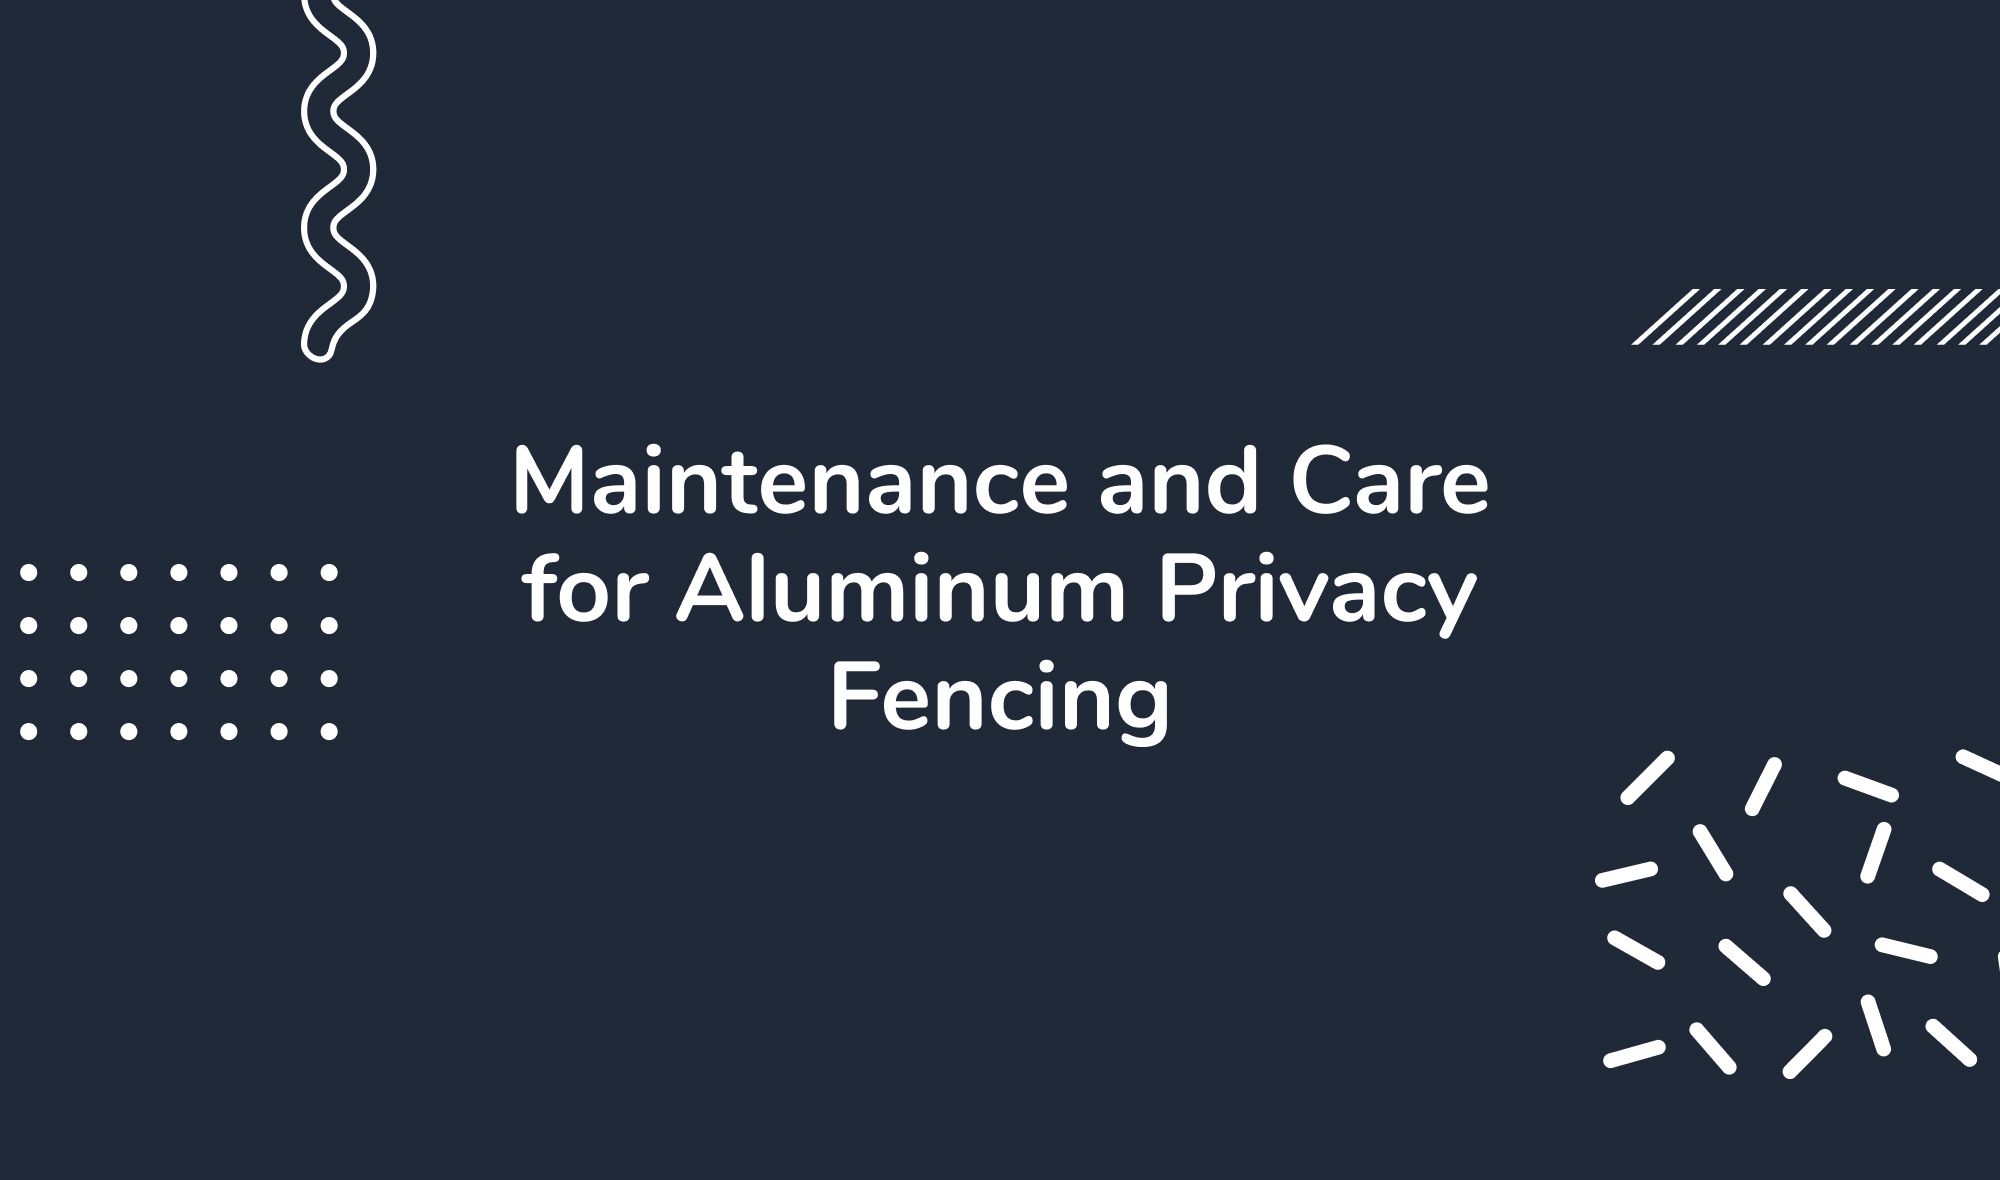 Maintenance and Care for Aluminum Privacy Fencing